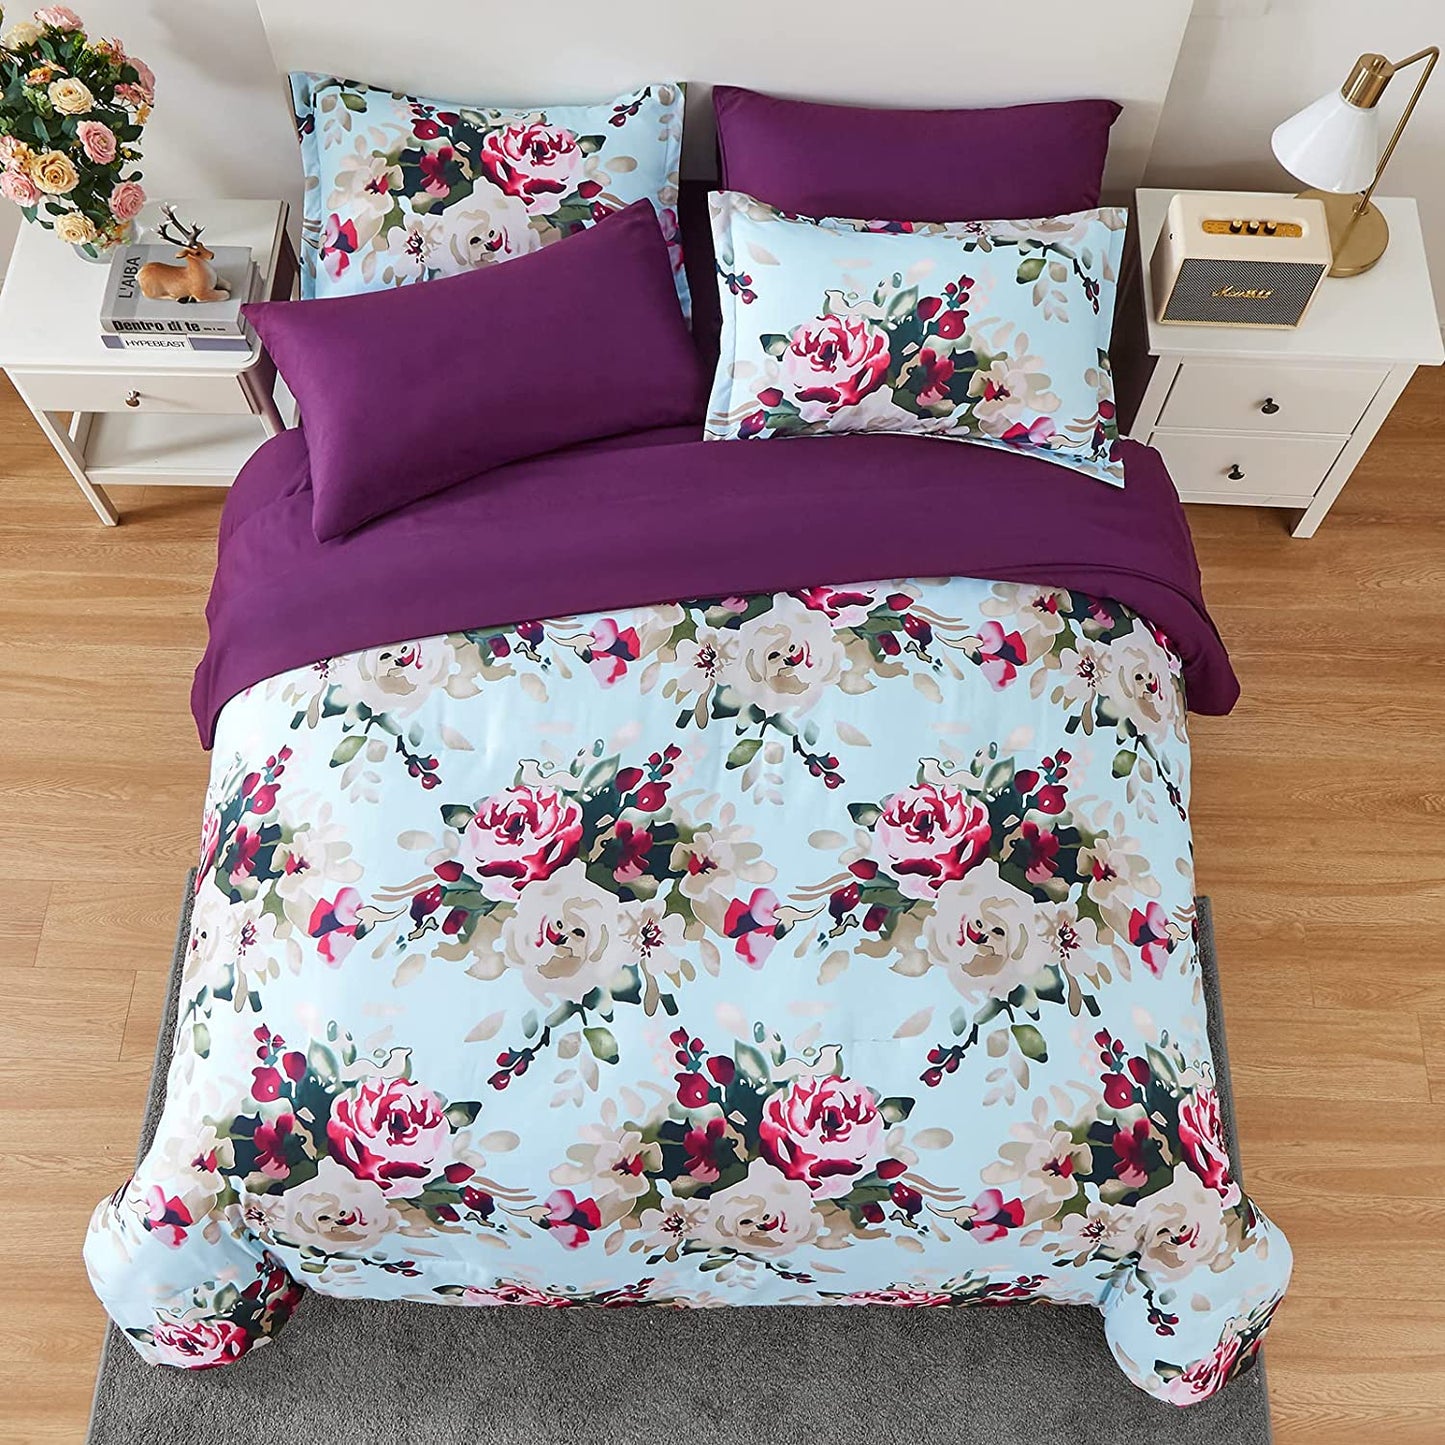 Watercolor Blooms Print Design 7 Pieces Comforter Set With 4 Pillows